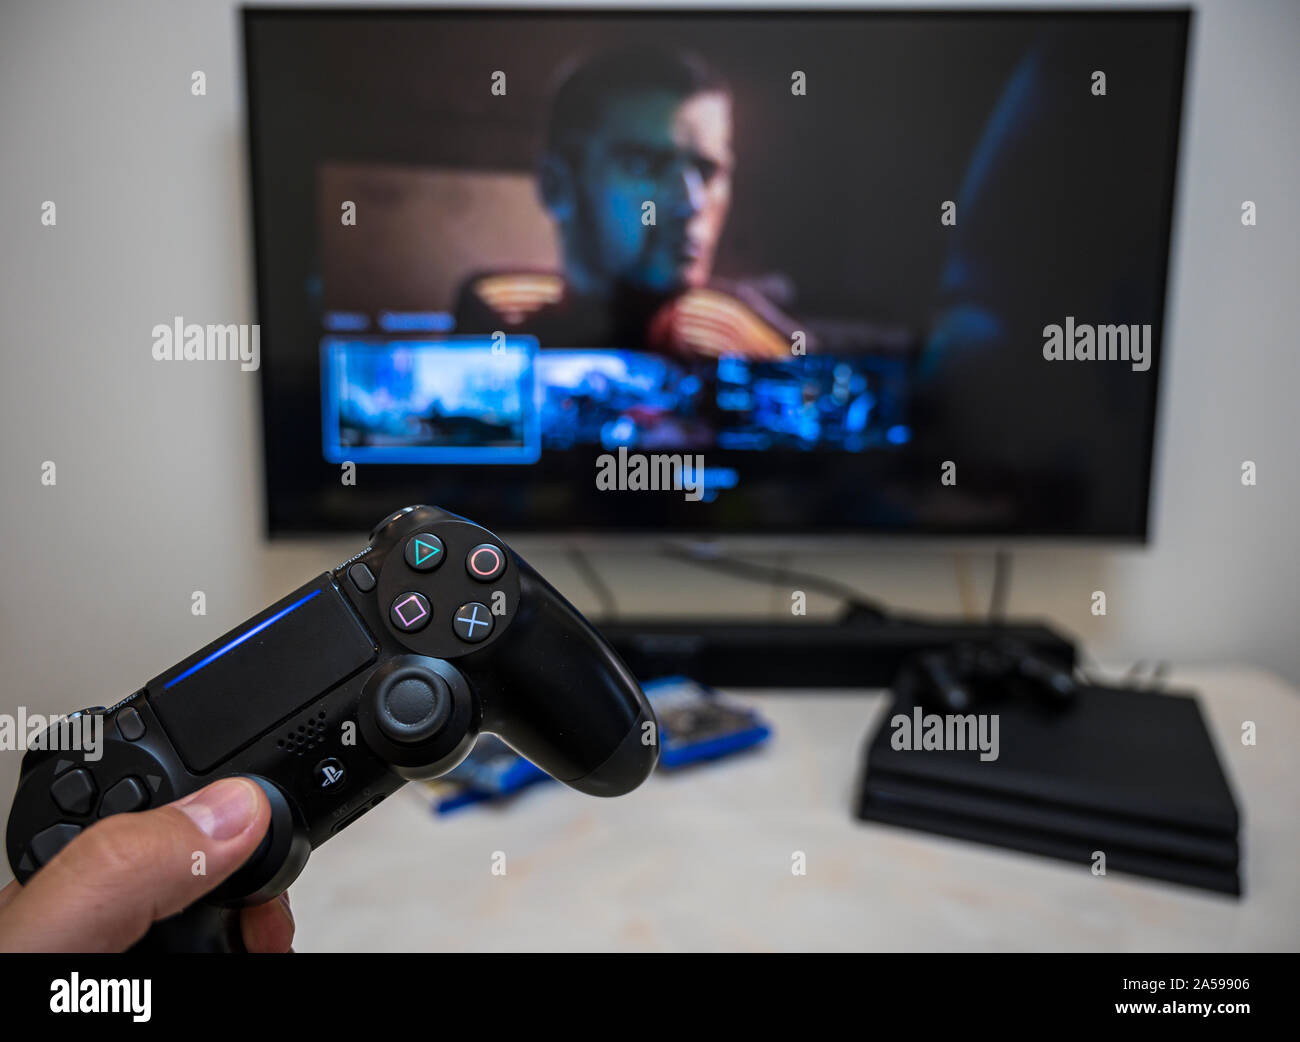 Pre-order, download, play Sony Play Station 4 Pro game Cyberpunk 2077 on the big LCD screen at home. Controller in the hand. Stock Photo